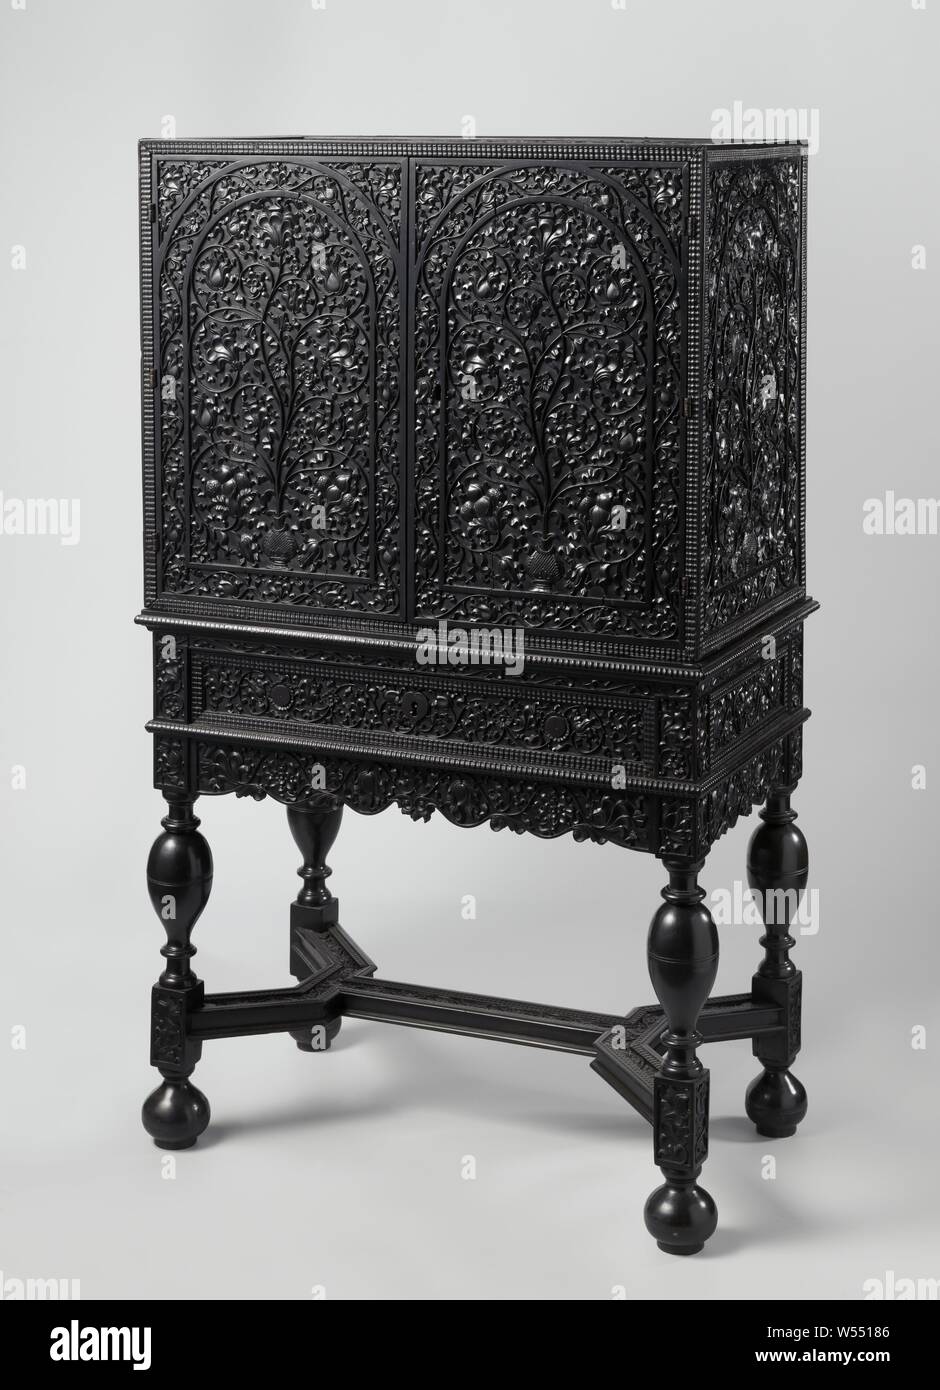 Cabinet, two-door, on base and decorated with sculpture, Ebony two-door cabinet on base, decorated with sculpture. The frame with drawer rests on vase-shaped articulated legs with houses, connected by a double Y-shaped cross and resting on bulbs. The sculpture of the doors and the sides depicts arches with small vases, from which leaf vines with flowers sprout, which meandering and curling fill the background. The curved edges, swivels and the top of the cupboard, as well as the drawer, top rail, houses and cross of the frame show slender motifs., anonymous, Coromandelkust (possibly), c. 1680 Stock Photo